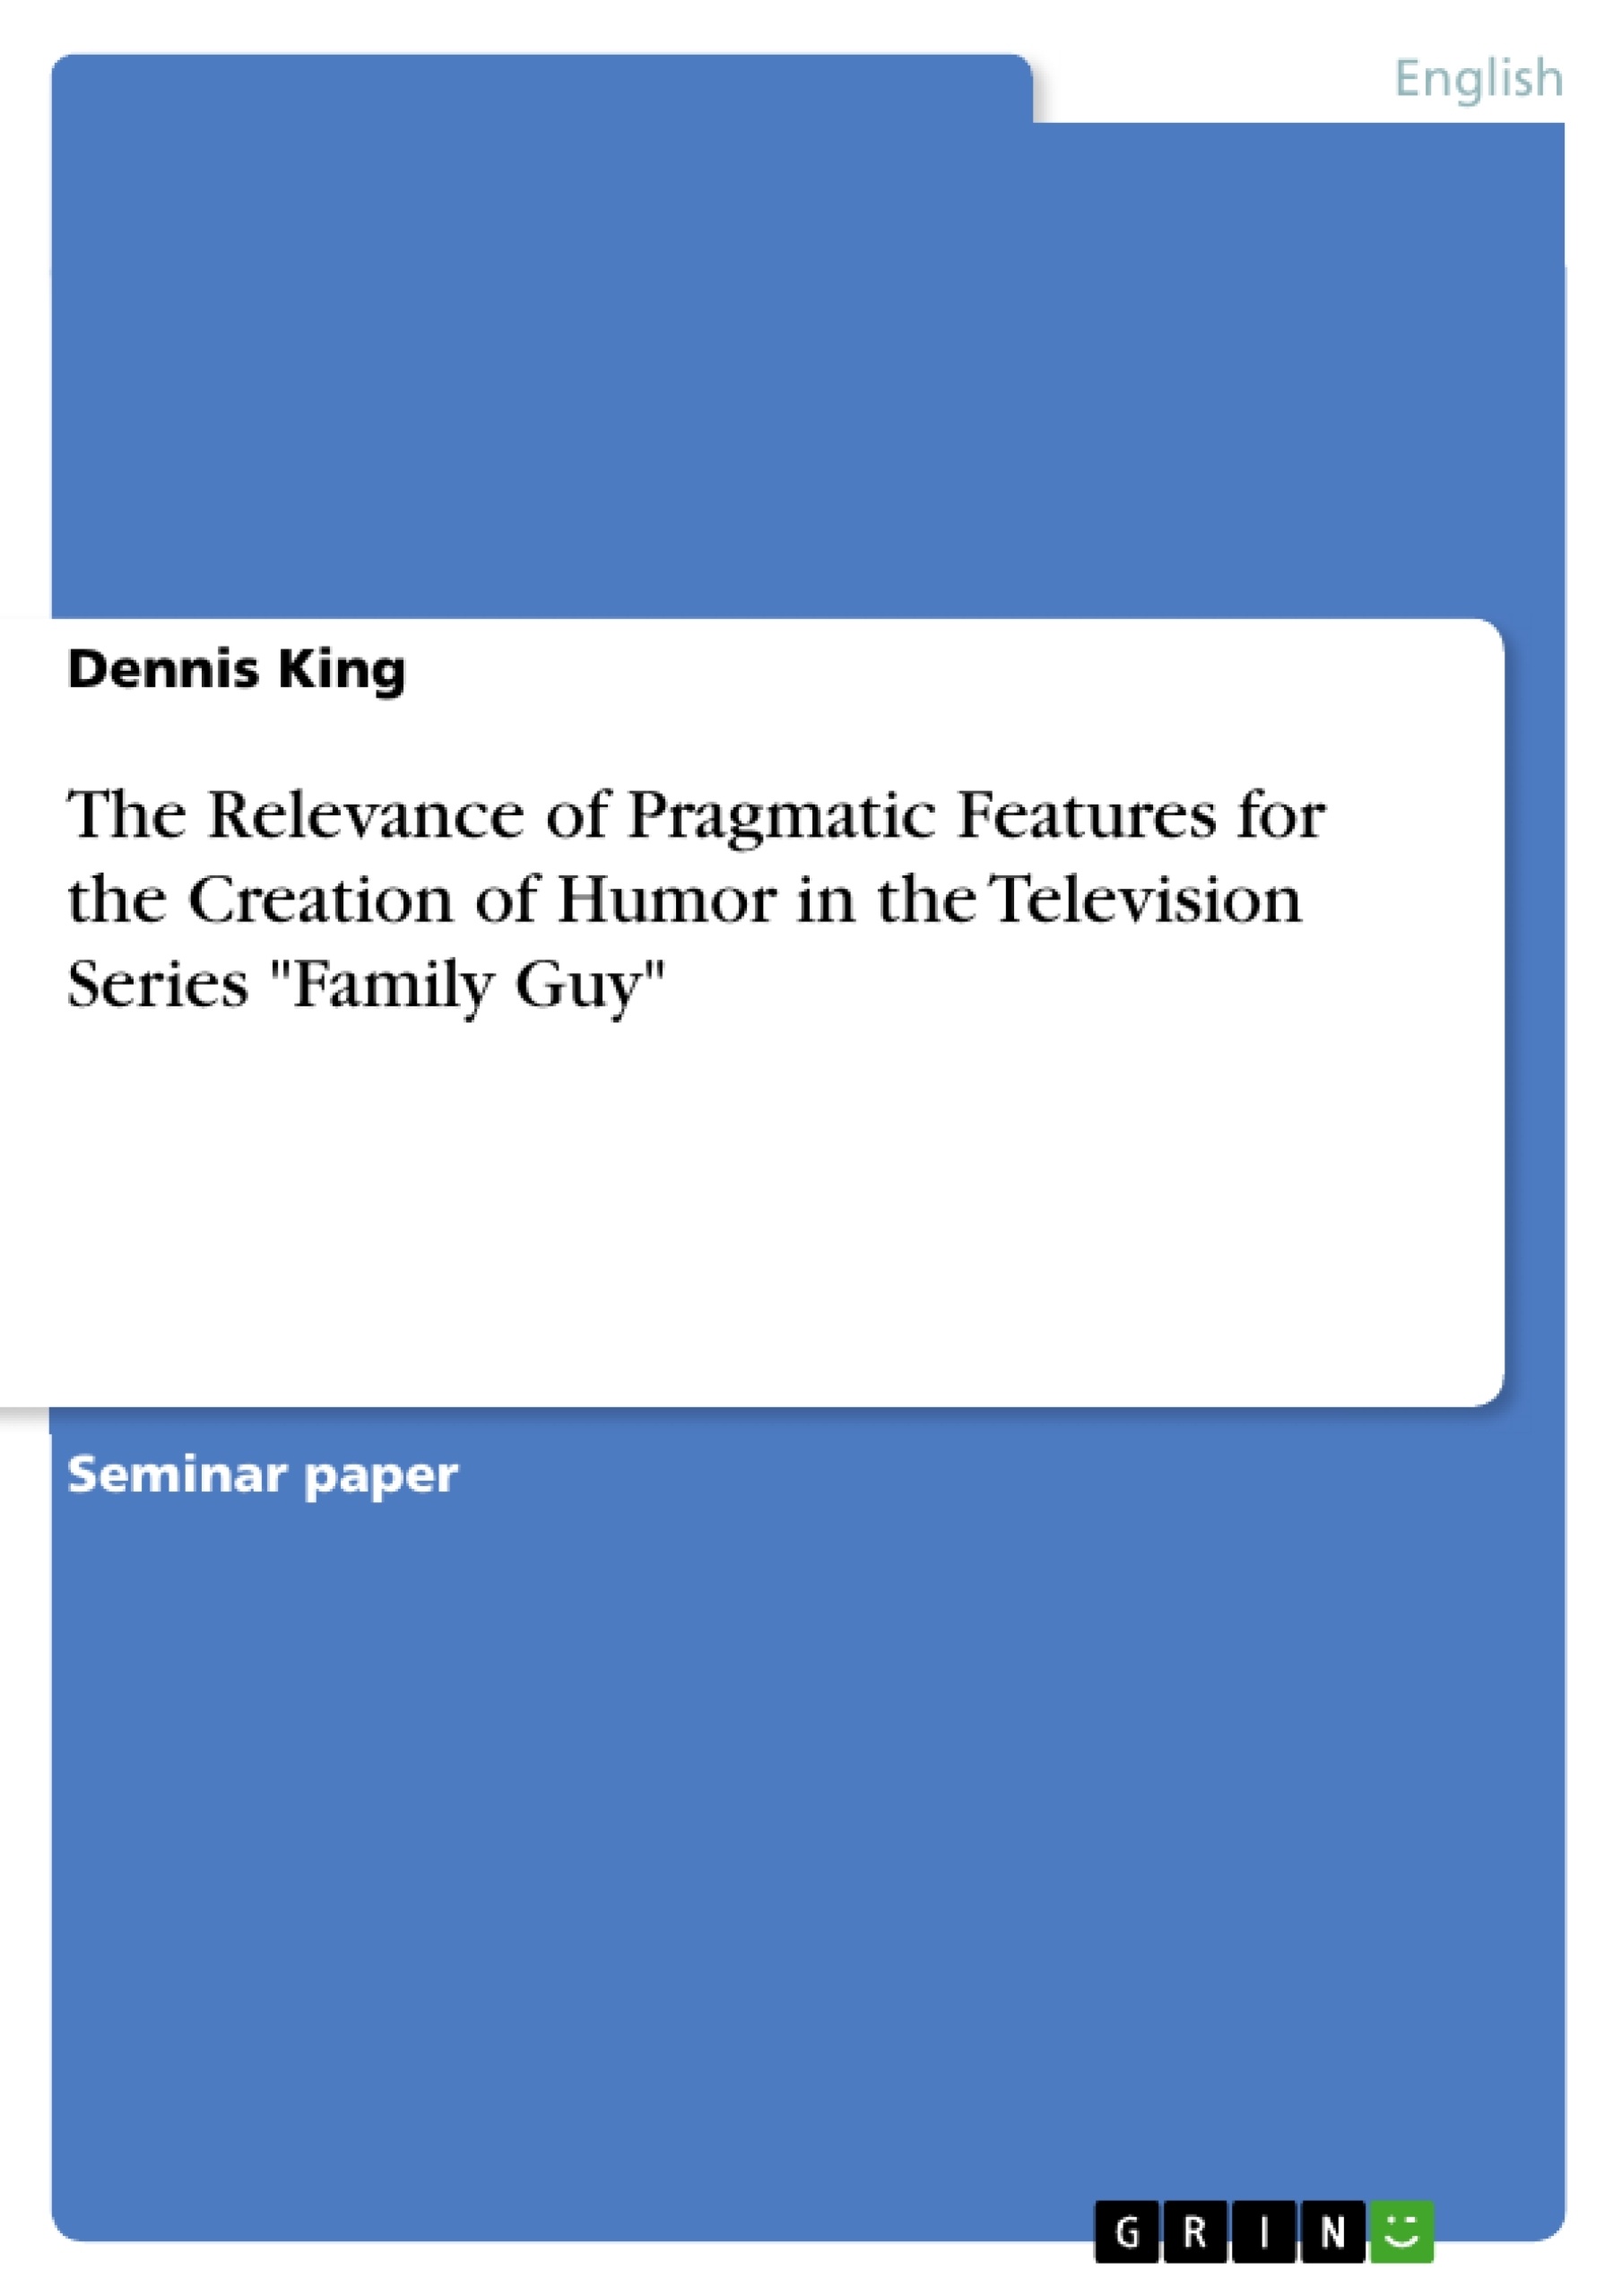 Título: The Relevance of Pragmatic Features for the Creation of Humor in the Television Series "Family Guy"